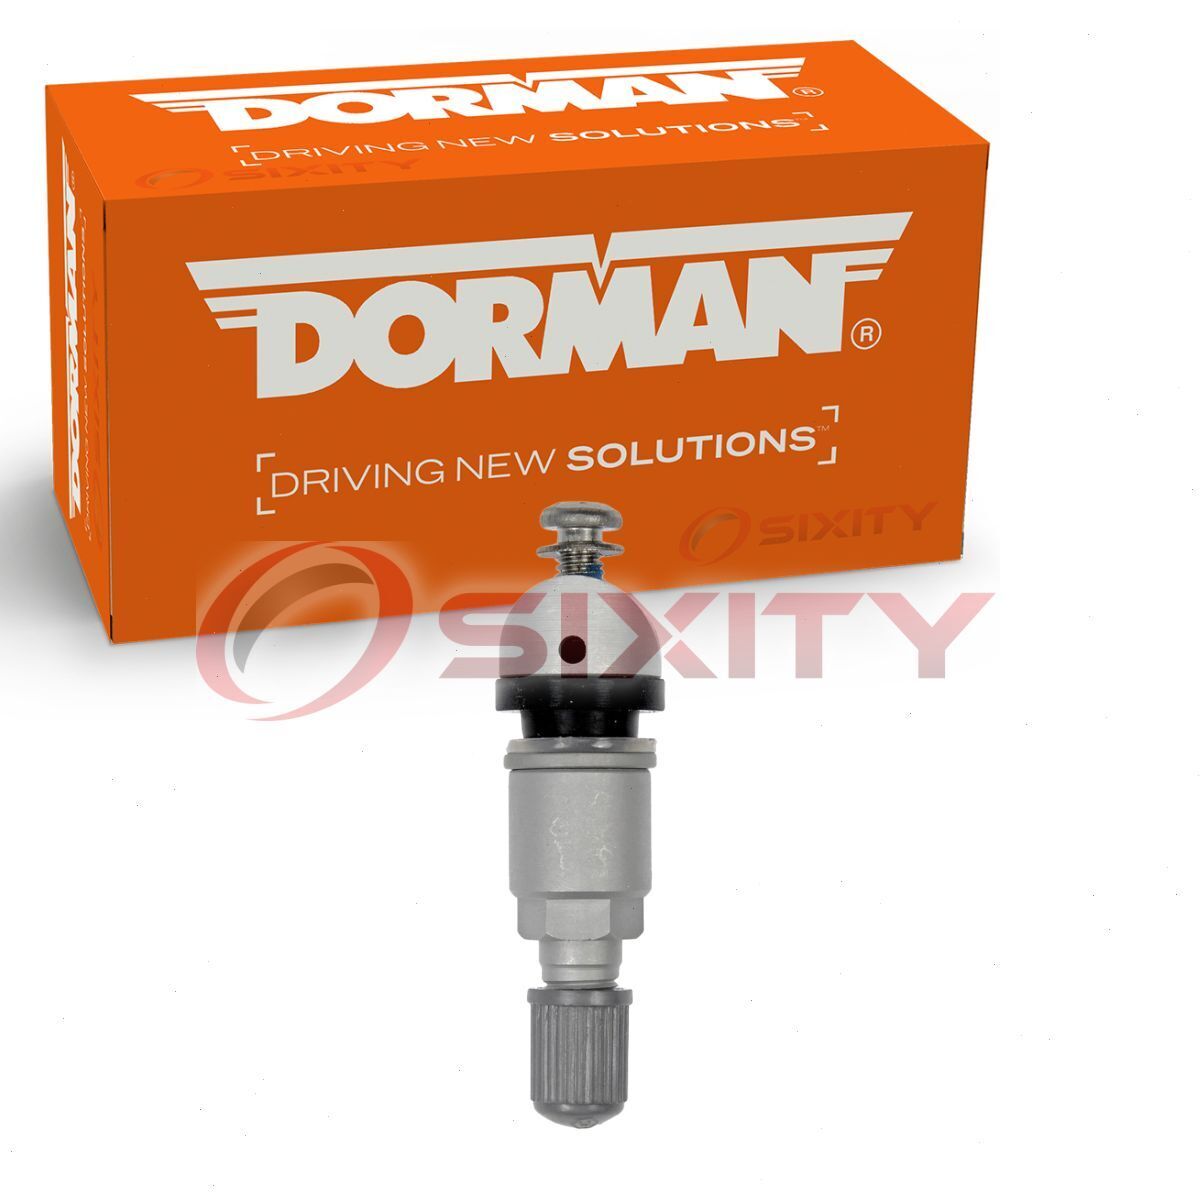 Dorman TPMS Valve Kit for 2006 Mercedes-Benz CLS55 AMG Tire Pressure as